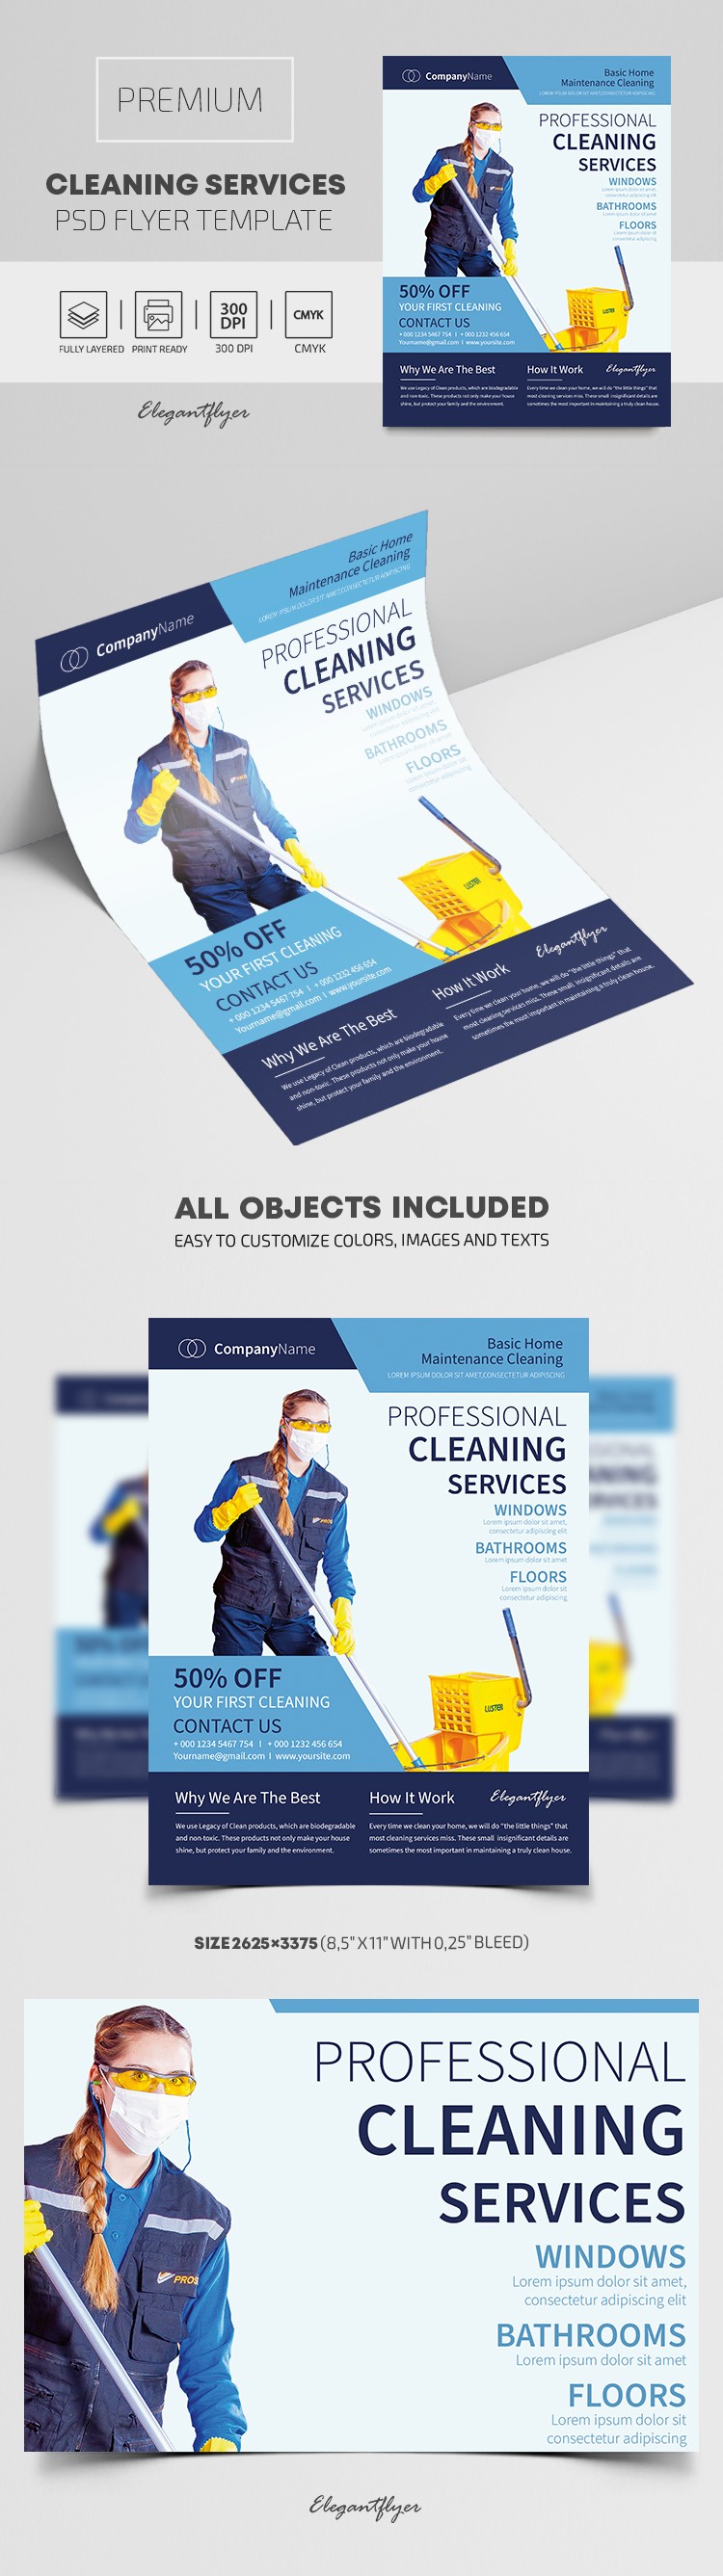 Cleaning Services Flyer by ElegantFlyer